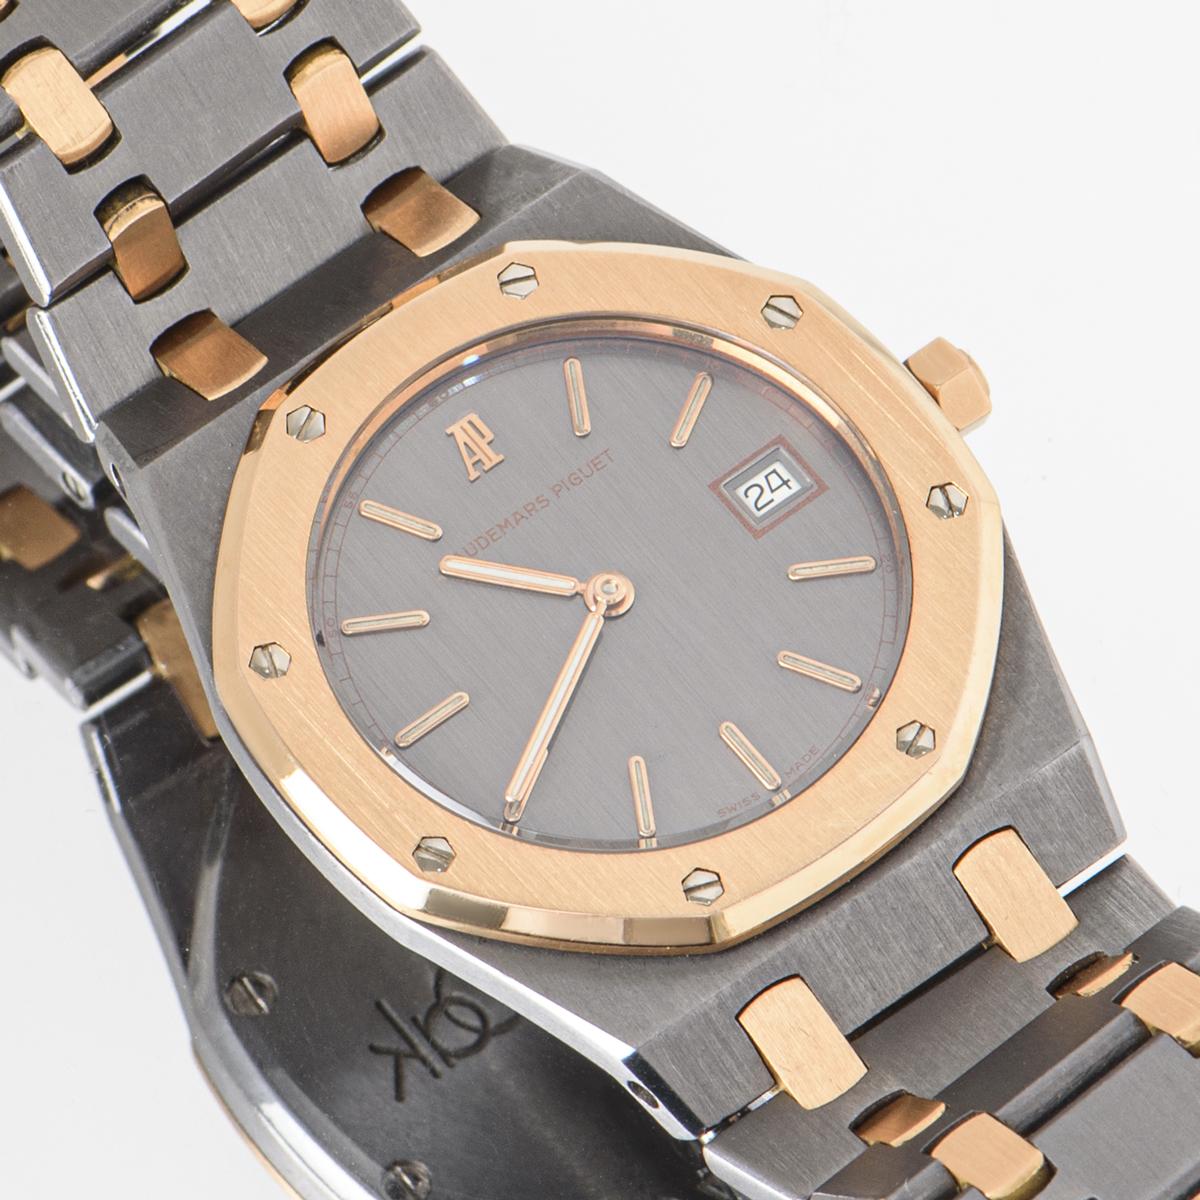 A 33mm mid-size Royal Oak in tantalum and rose gold from Audemars Piguet. Featuring an anthracite vertically brushed dial with the date at 3 o'clock. The rose gold bezel features the iconic eight screws which are synonymous with Audemars